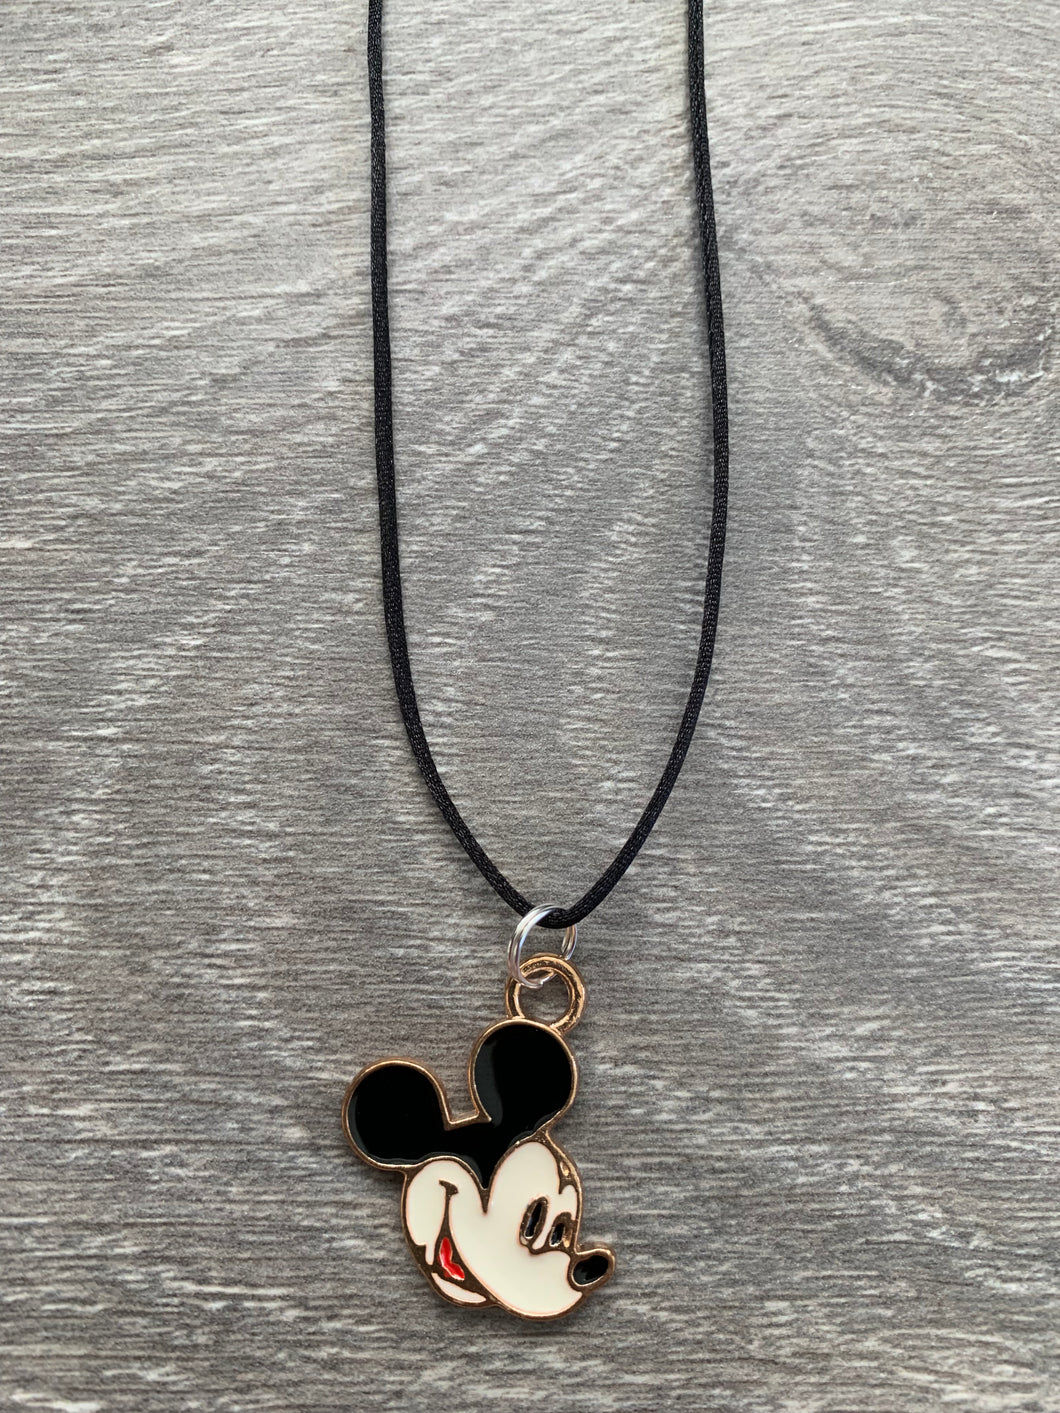 Mickey pendant only